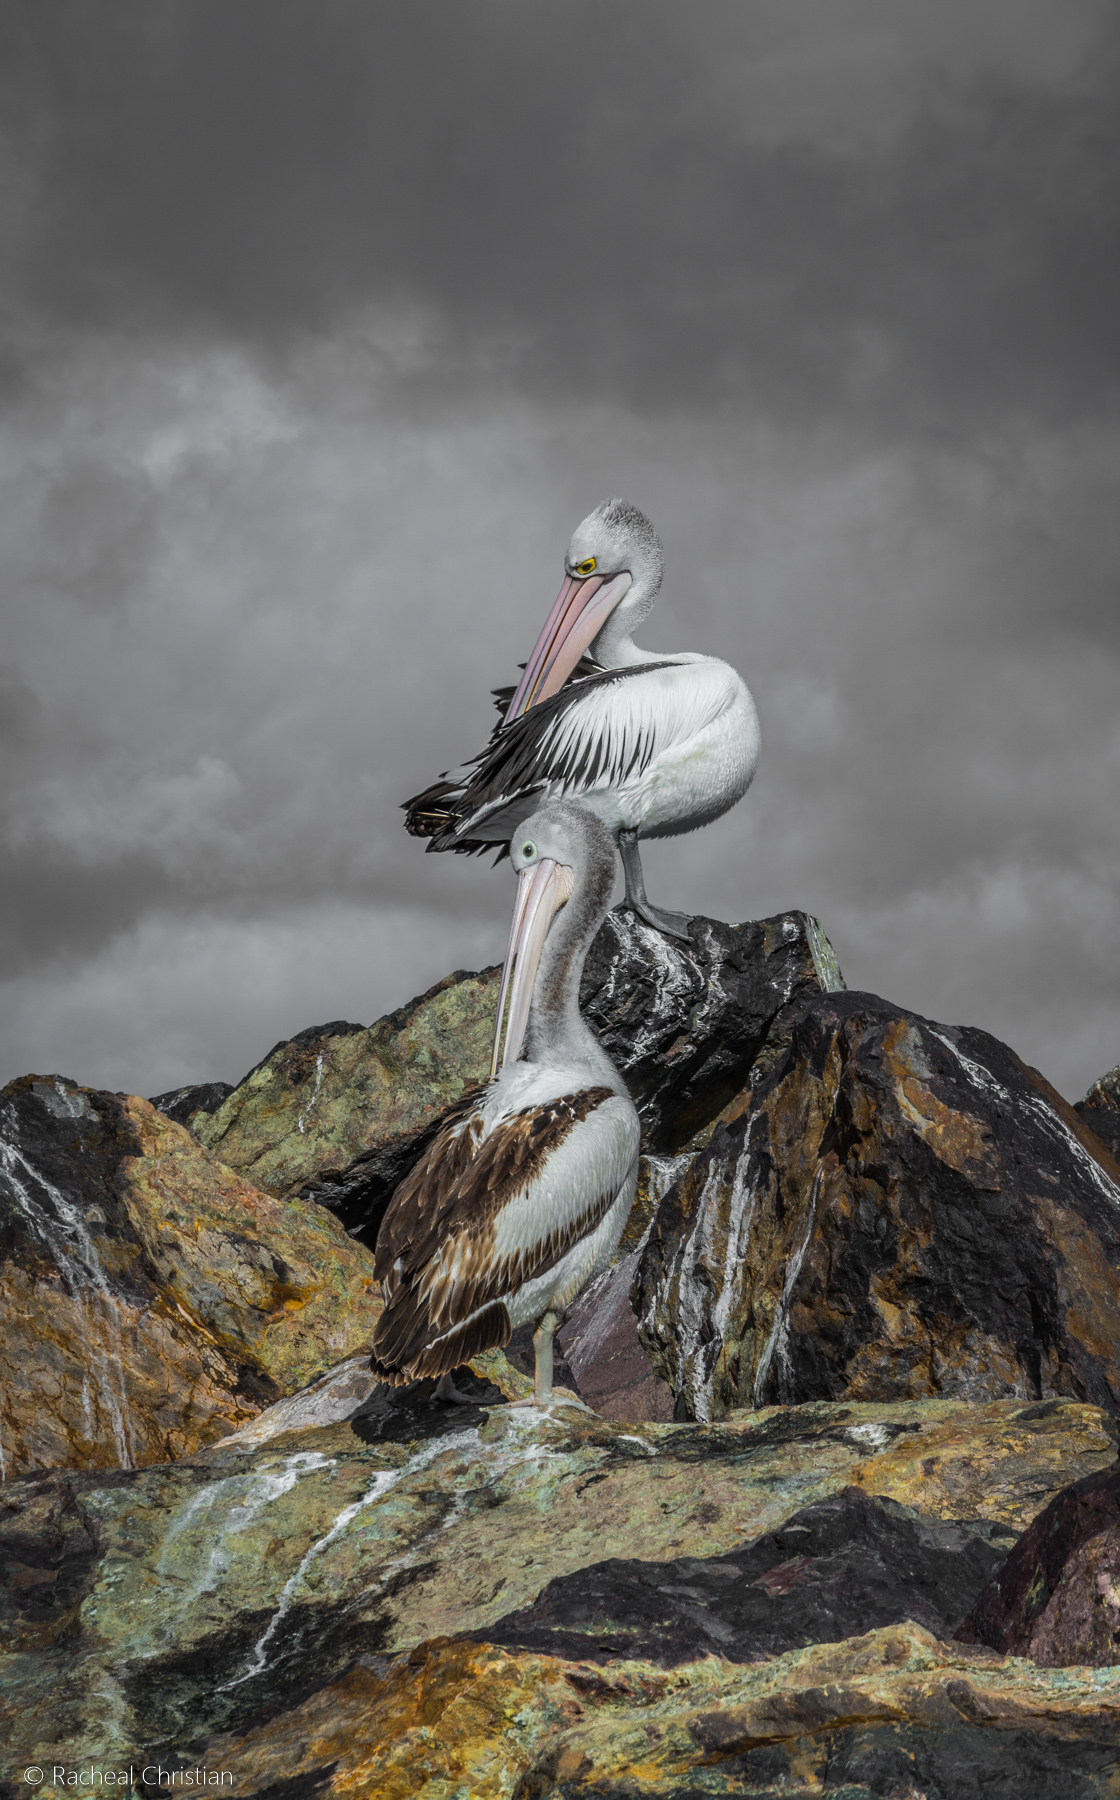 Pelican: 'Pelicans On Rocks' by Racheal Christian - Photographed at Eden Wharf in NSWrachealchristianphotography.com